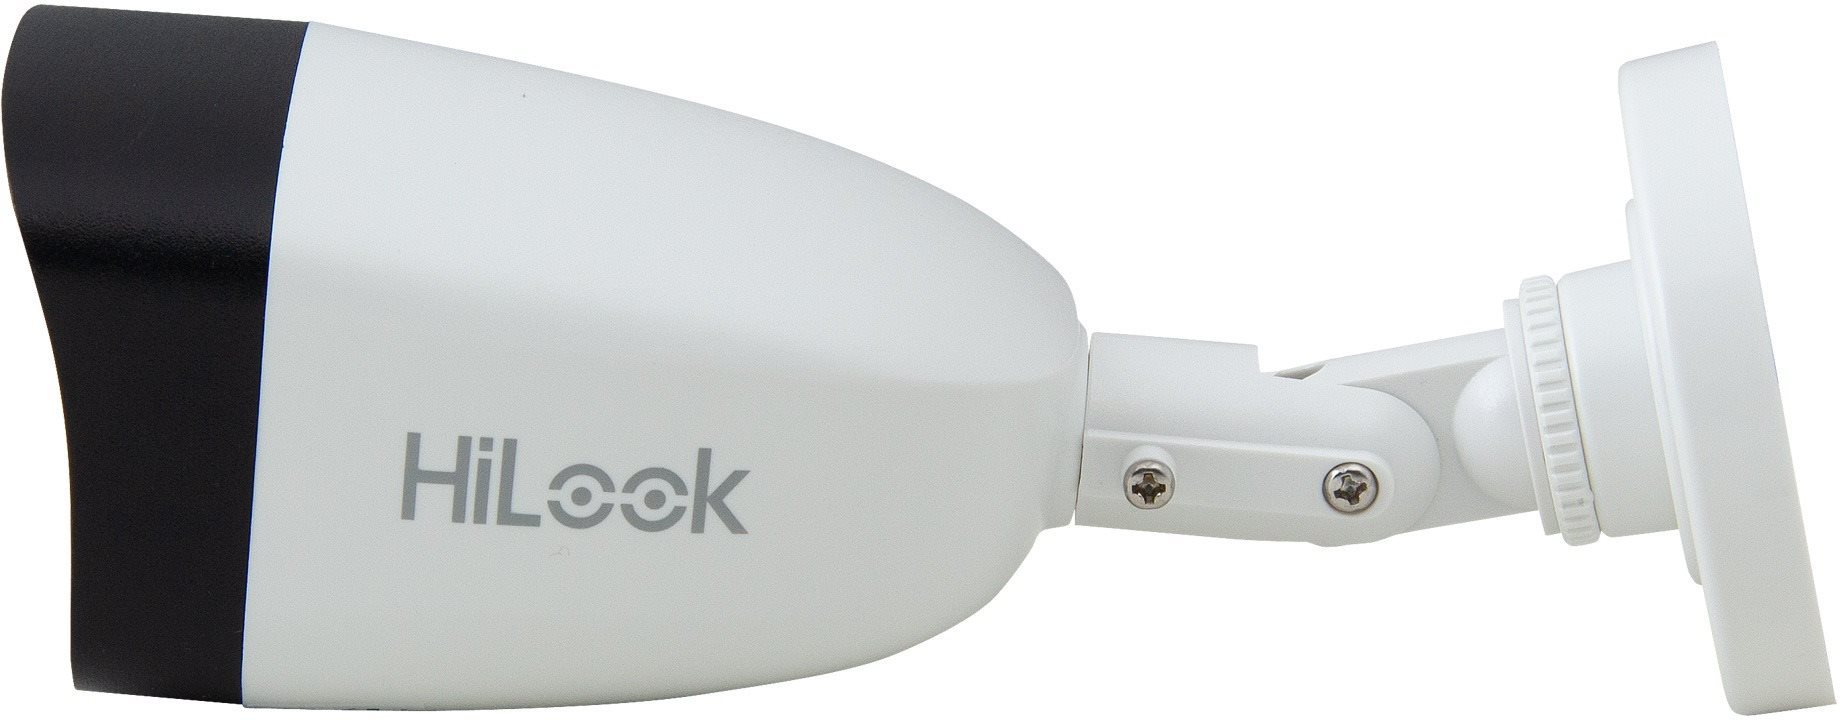 IP Camera HIKVISION HiLook IPC-B140H Lateral view